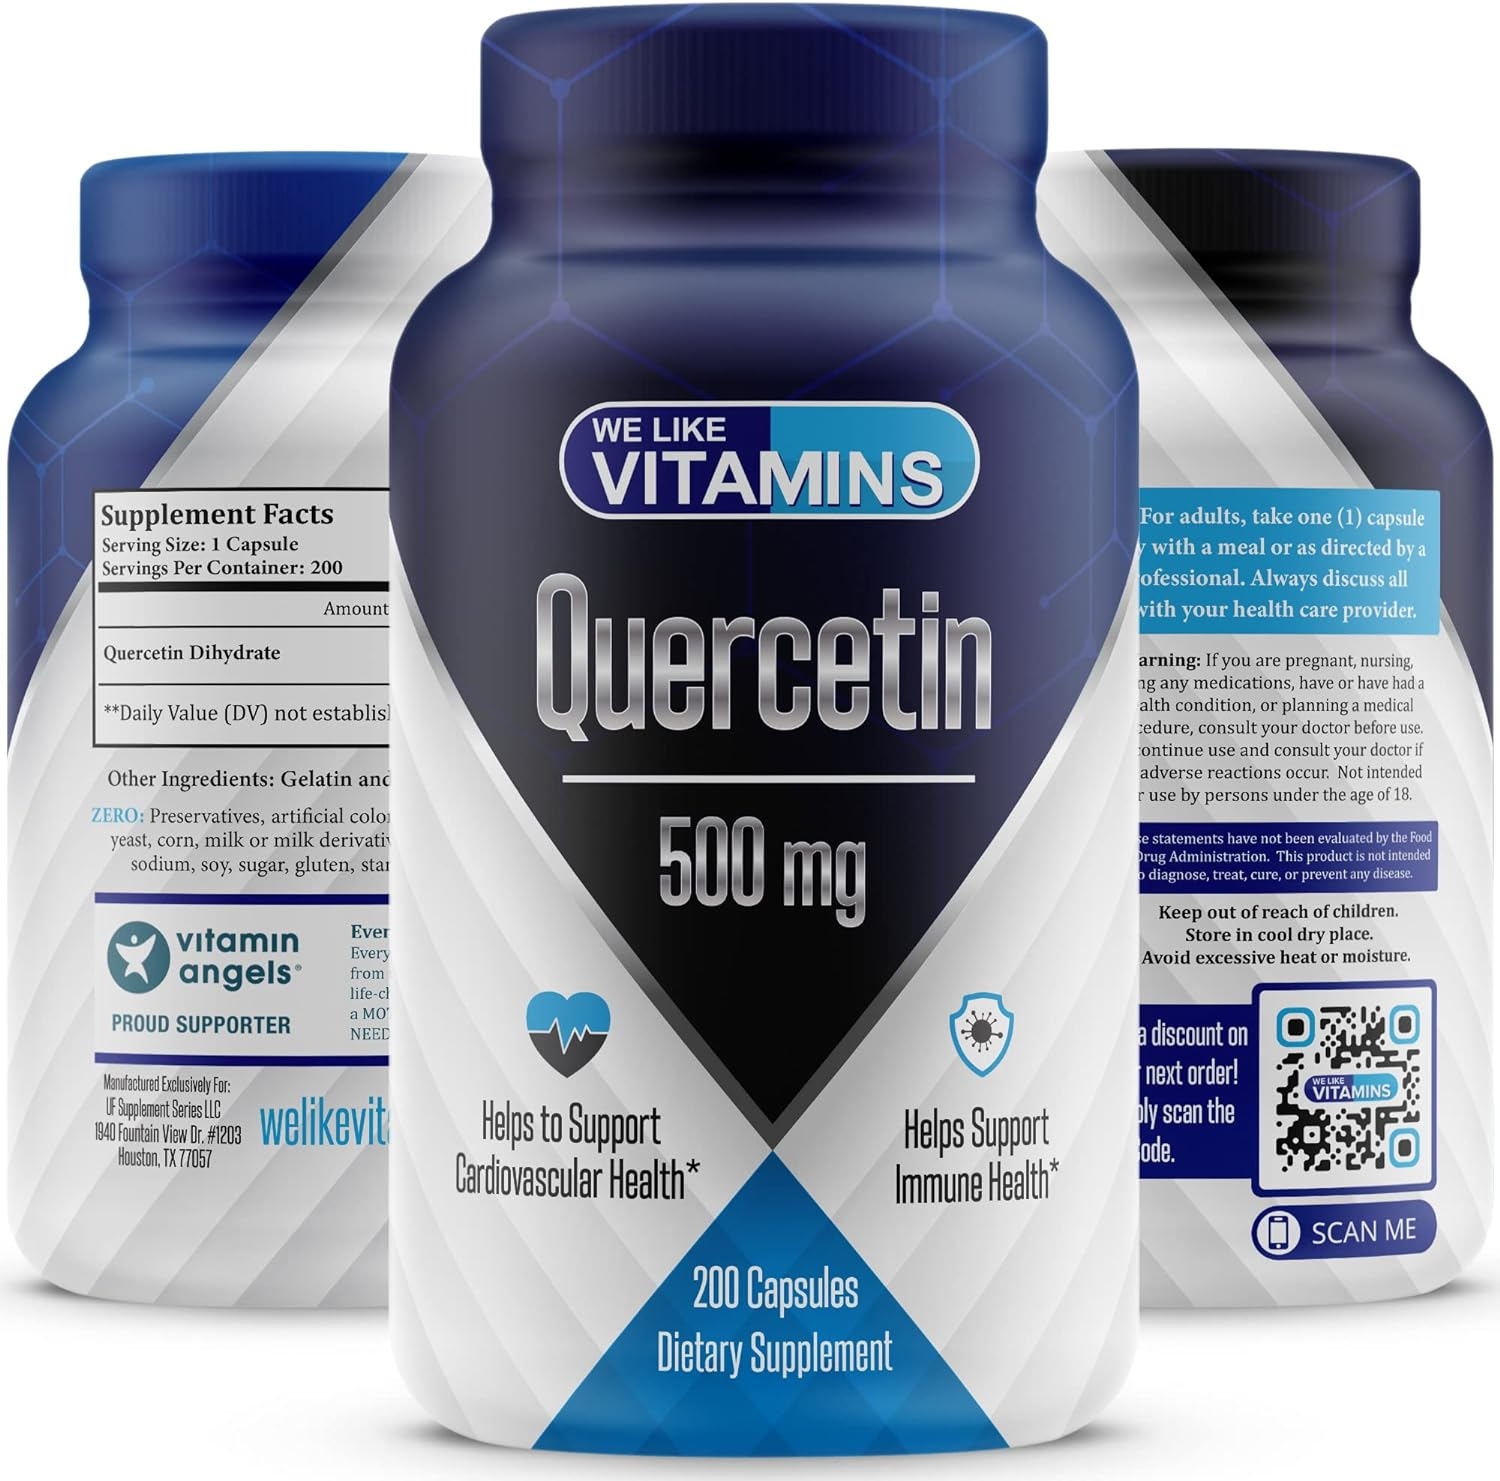 Quercetin 500mg Natural Antihistamine - Quercetin Supplement Helps Support Cardiovascular, Immune, and Cellular Function (200)